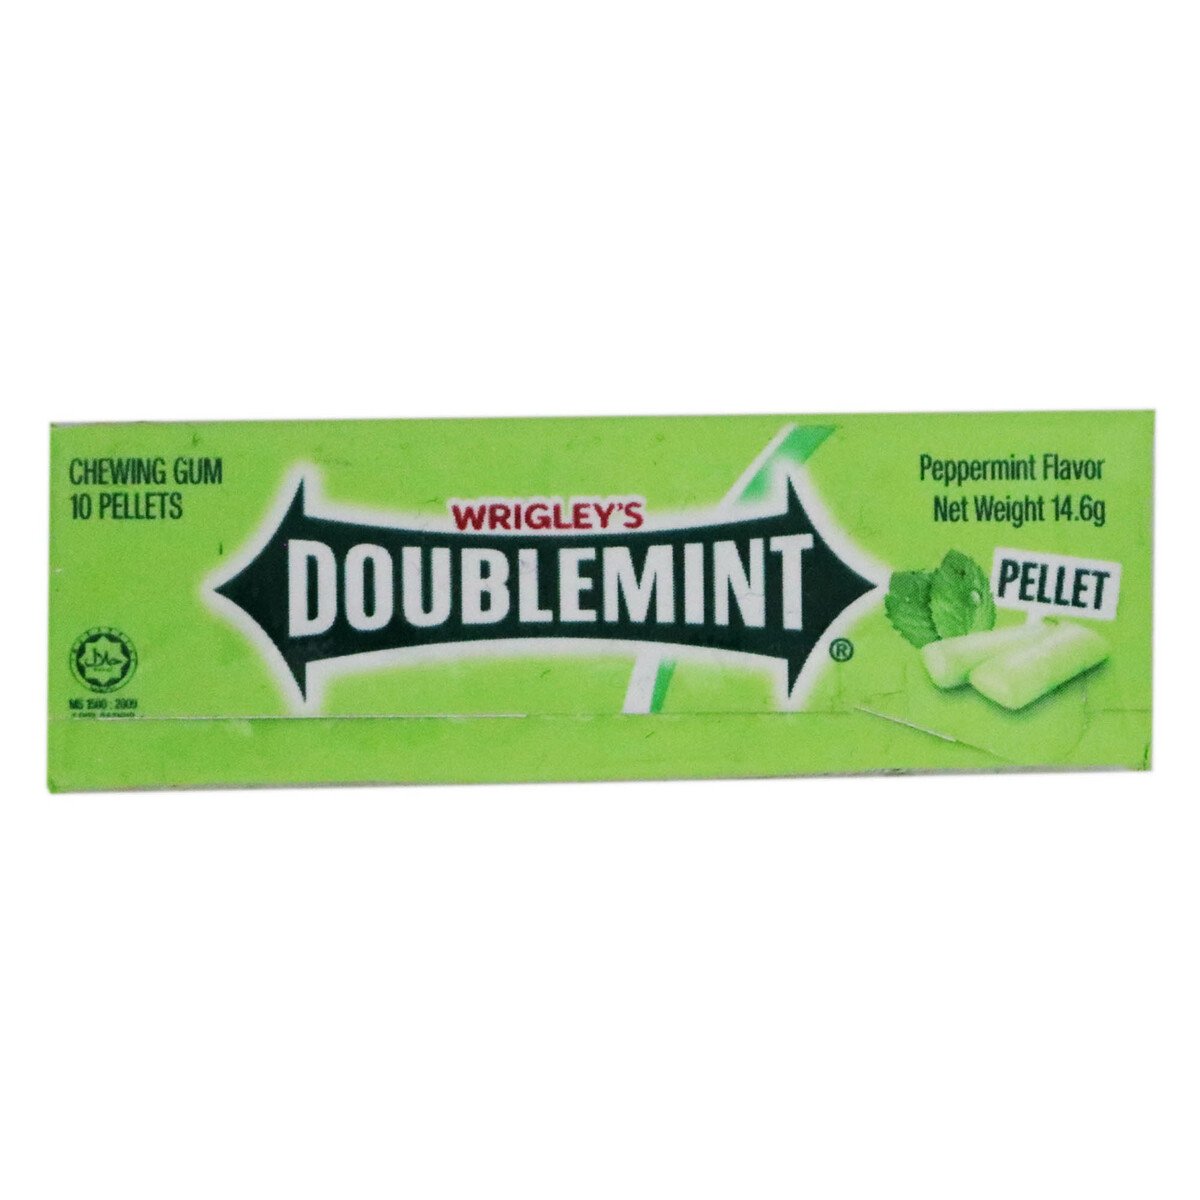 Doublemint Chewing Gum 14.6g Online at Best Price | Breath Fresheners ...